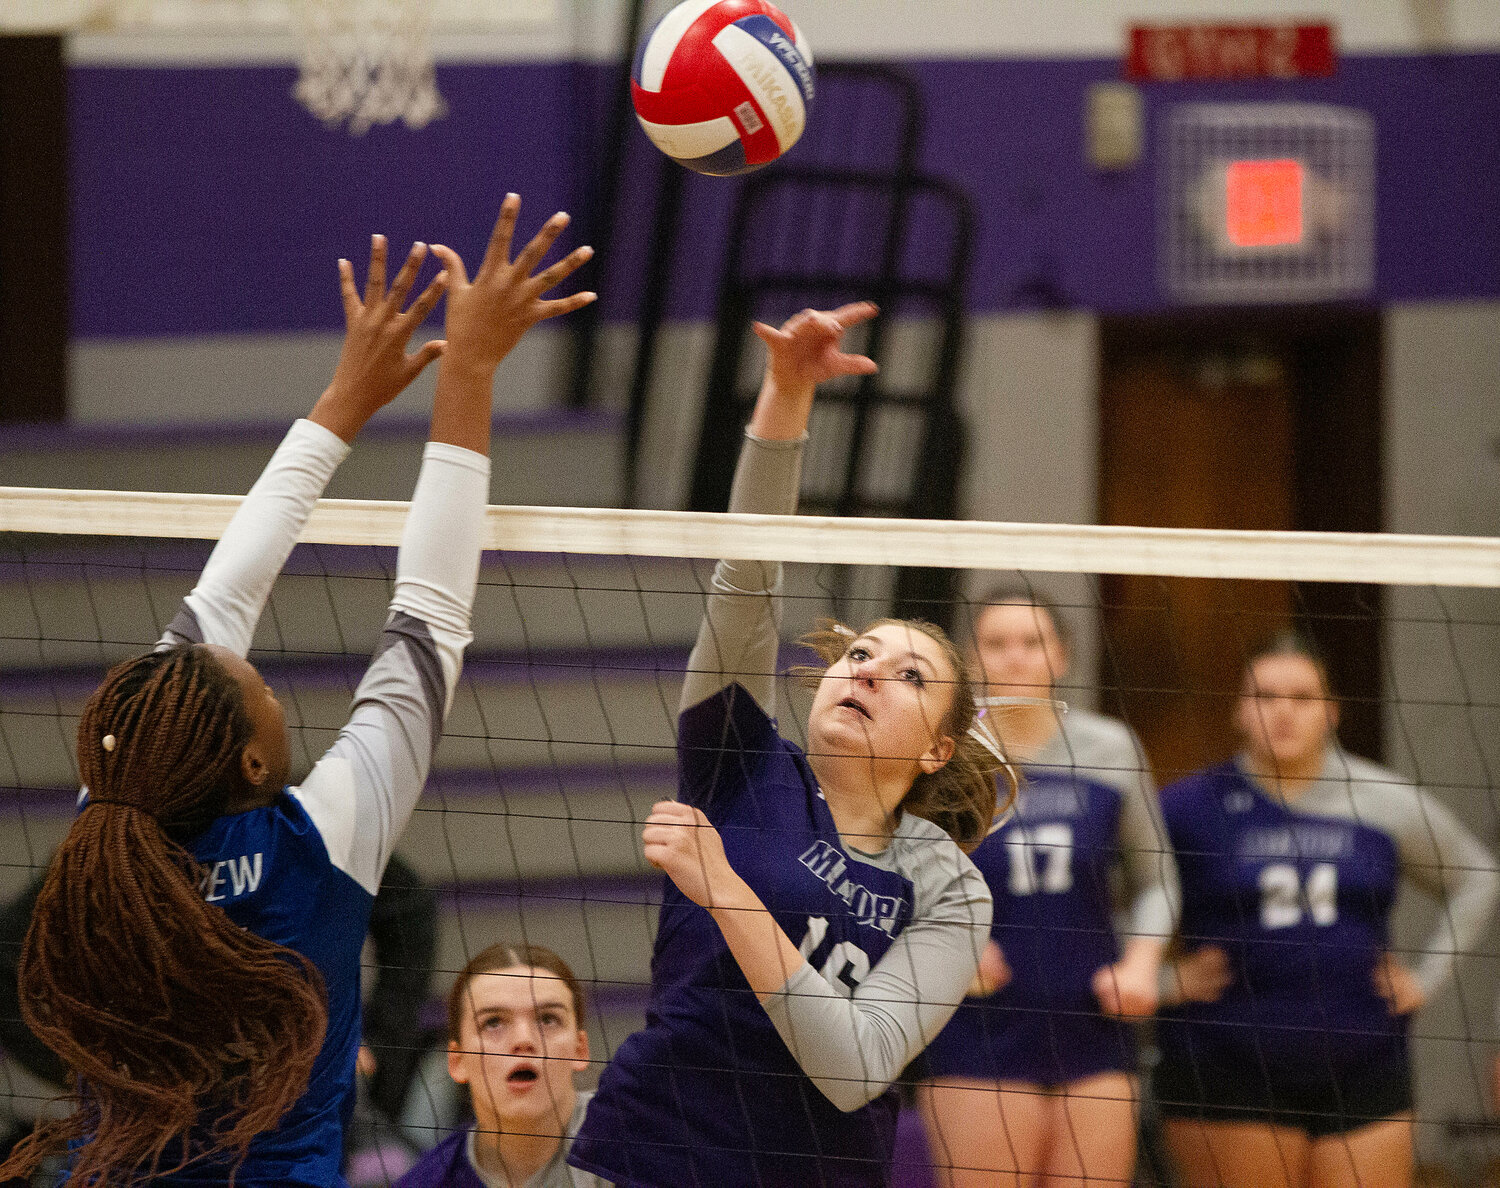 Abby Allen hits the ball over for a Huskies point.